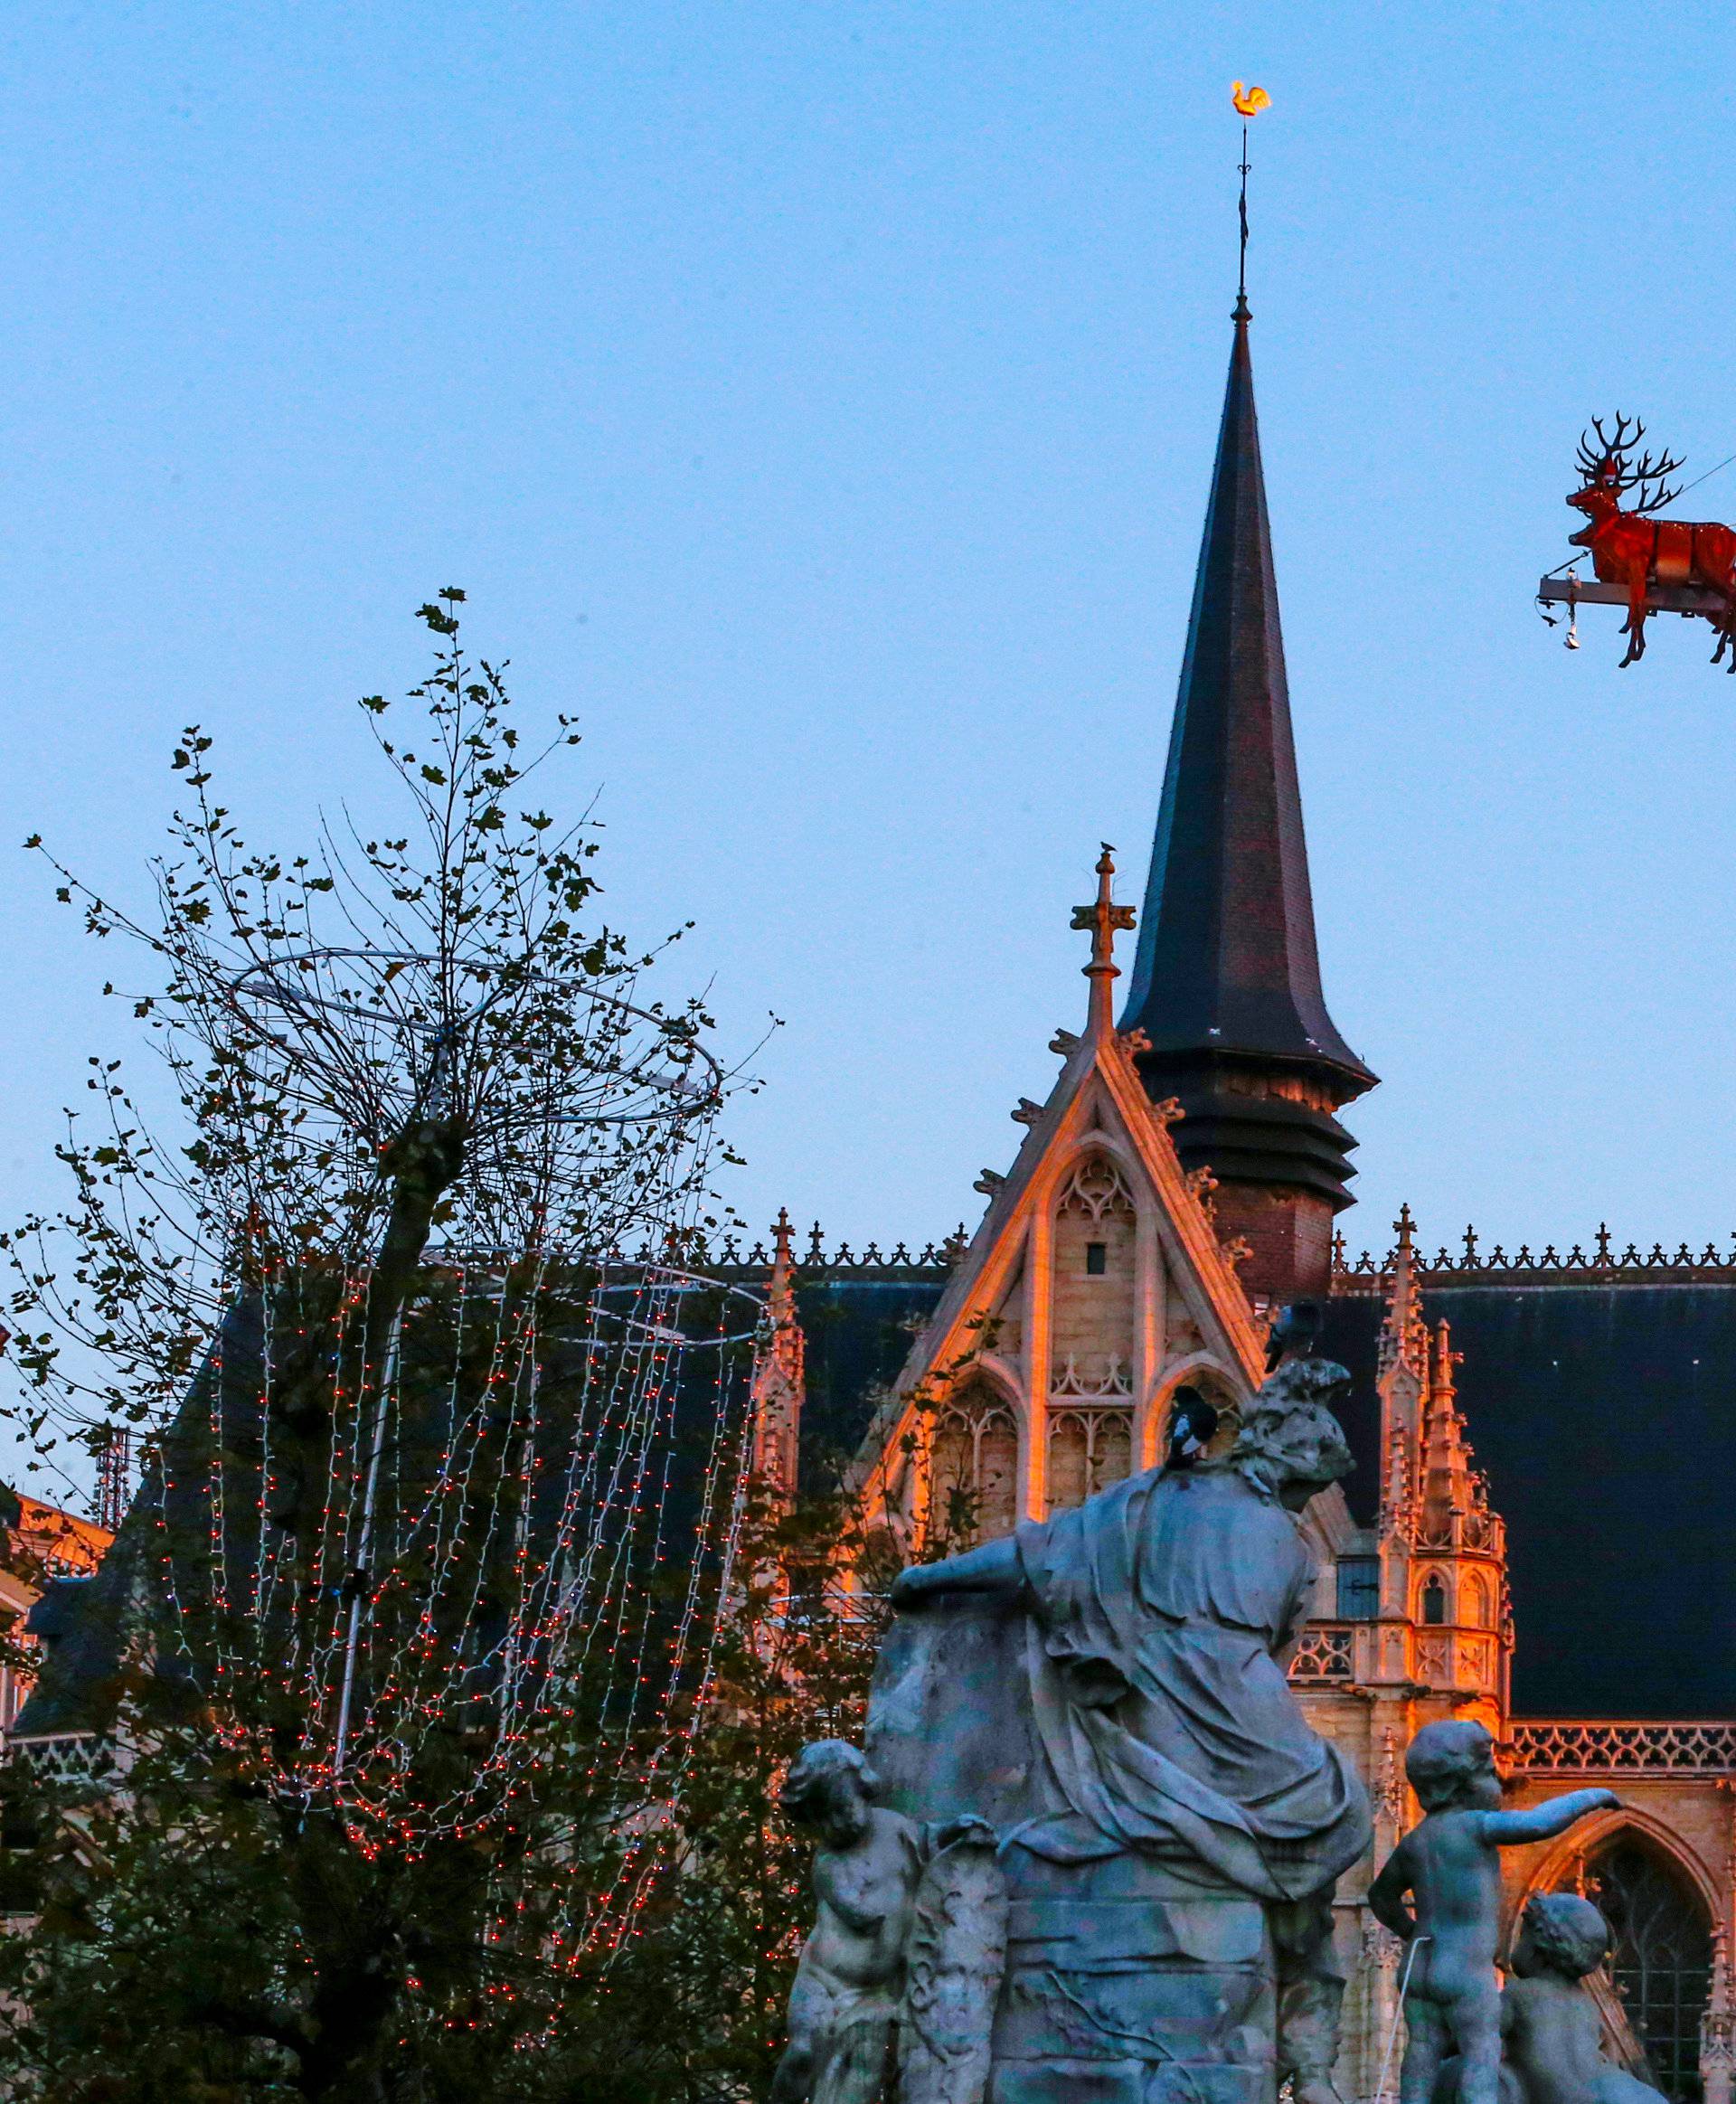 Guests enjoy dinner at the table "Santa in the sky", lifted by a crane and decorated to match the appearance of a "Santa Sleigh" as part as the Christmas festivities, in Brussels